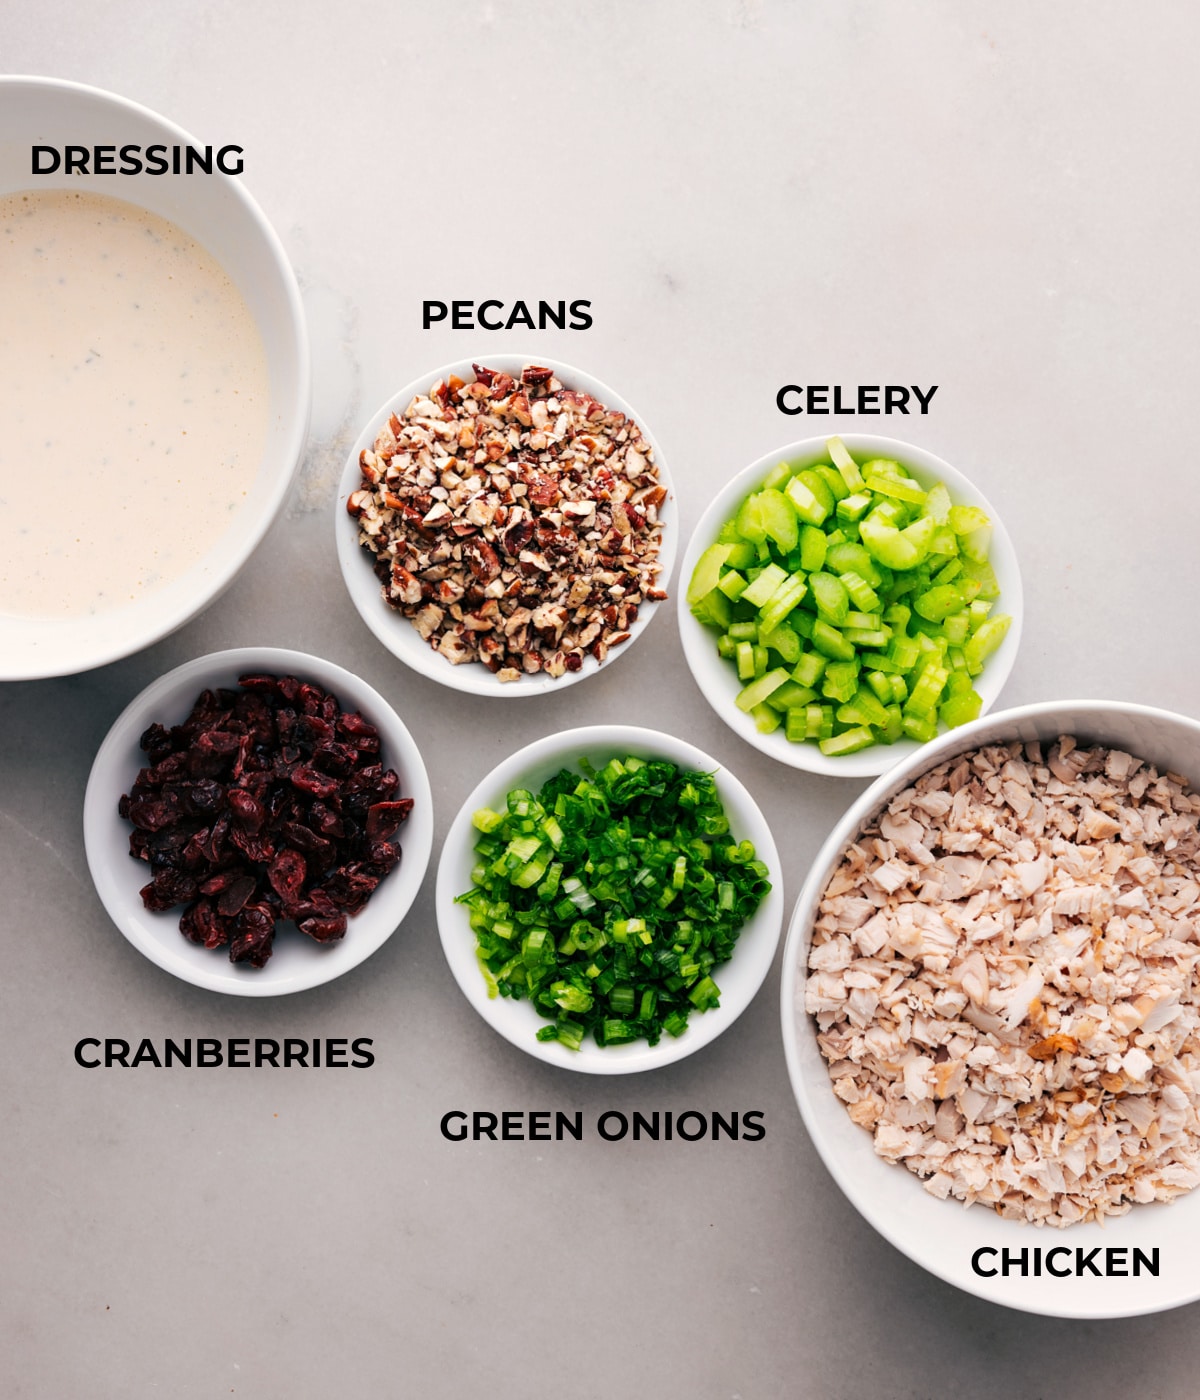 Ingredients for Rosemary chicken Salad featuring cranberries, celery, pecans, chicken, and additional items.